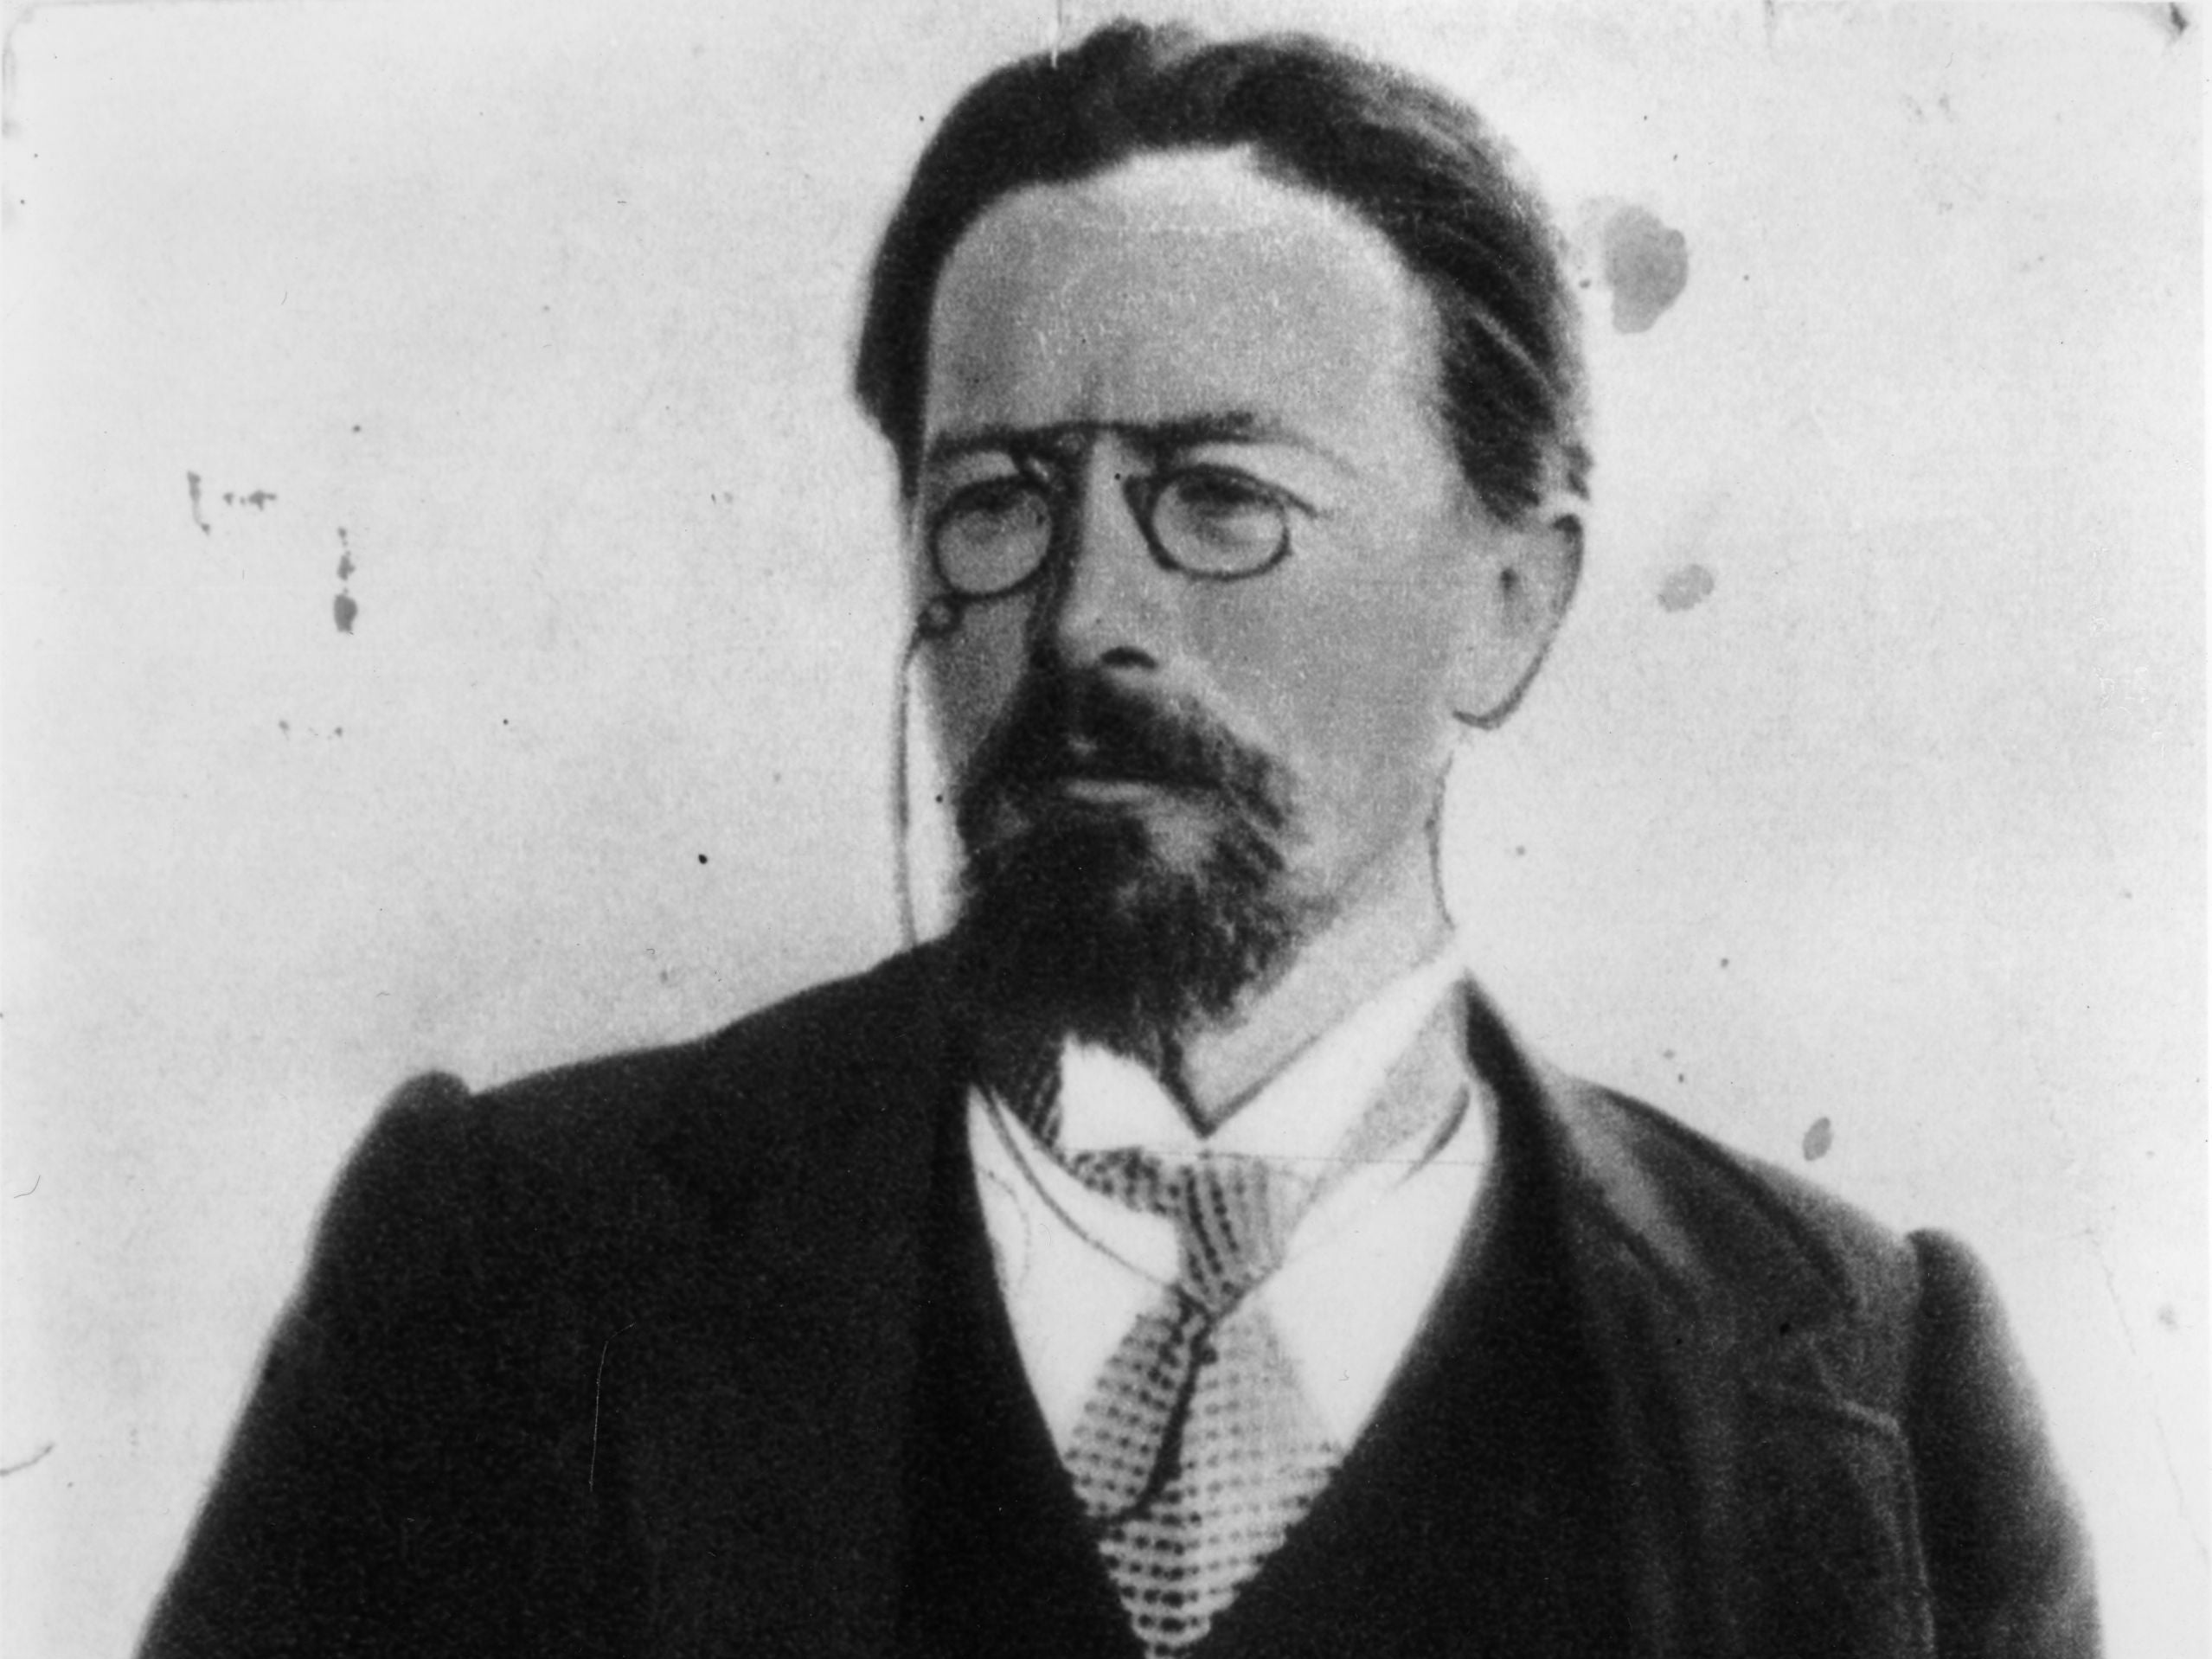 Anton Chekhov’s stories are full of light and shadow